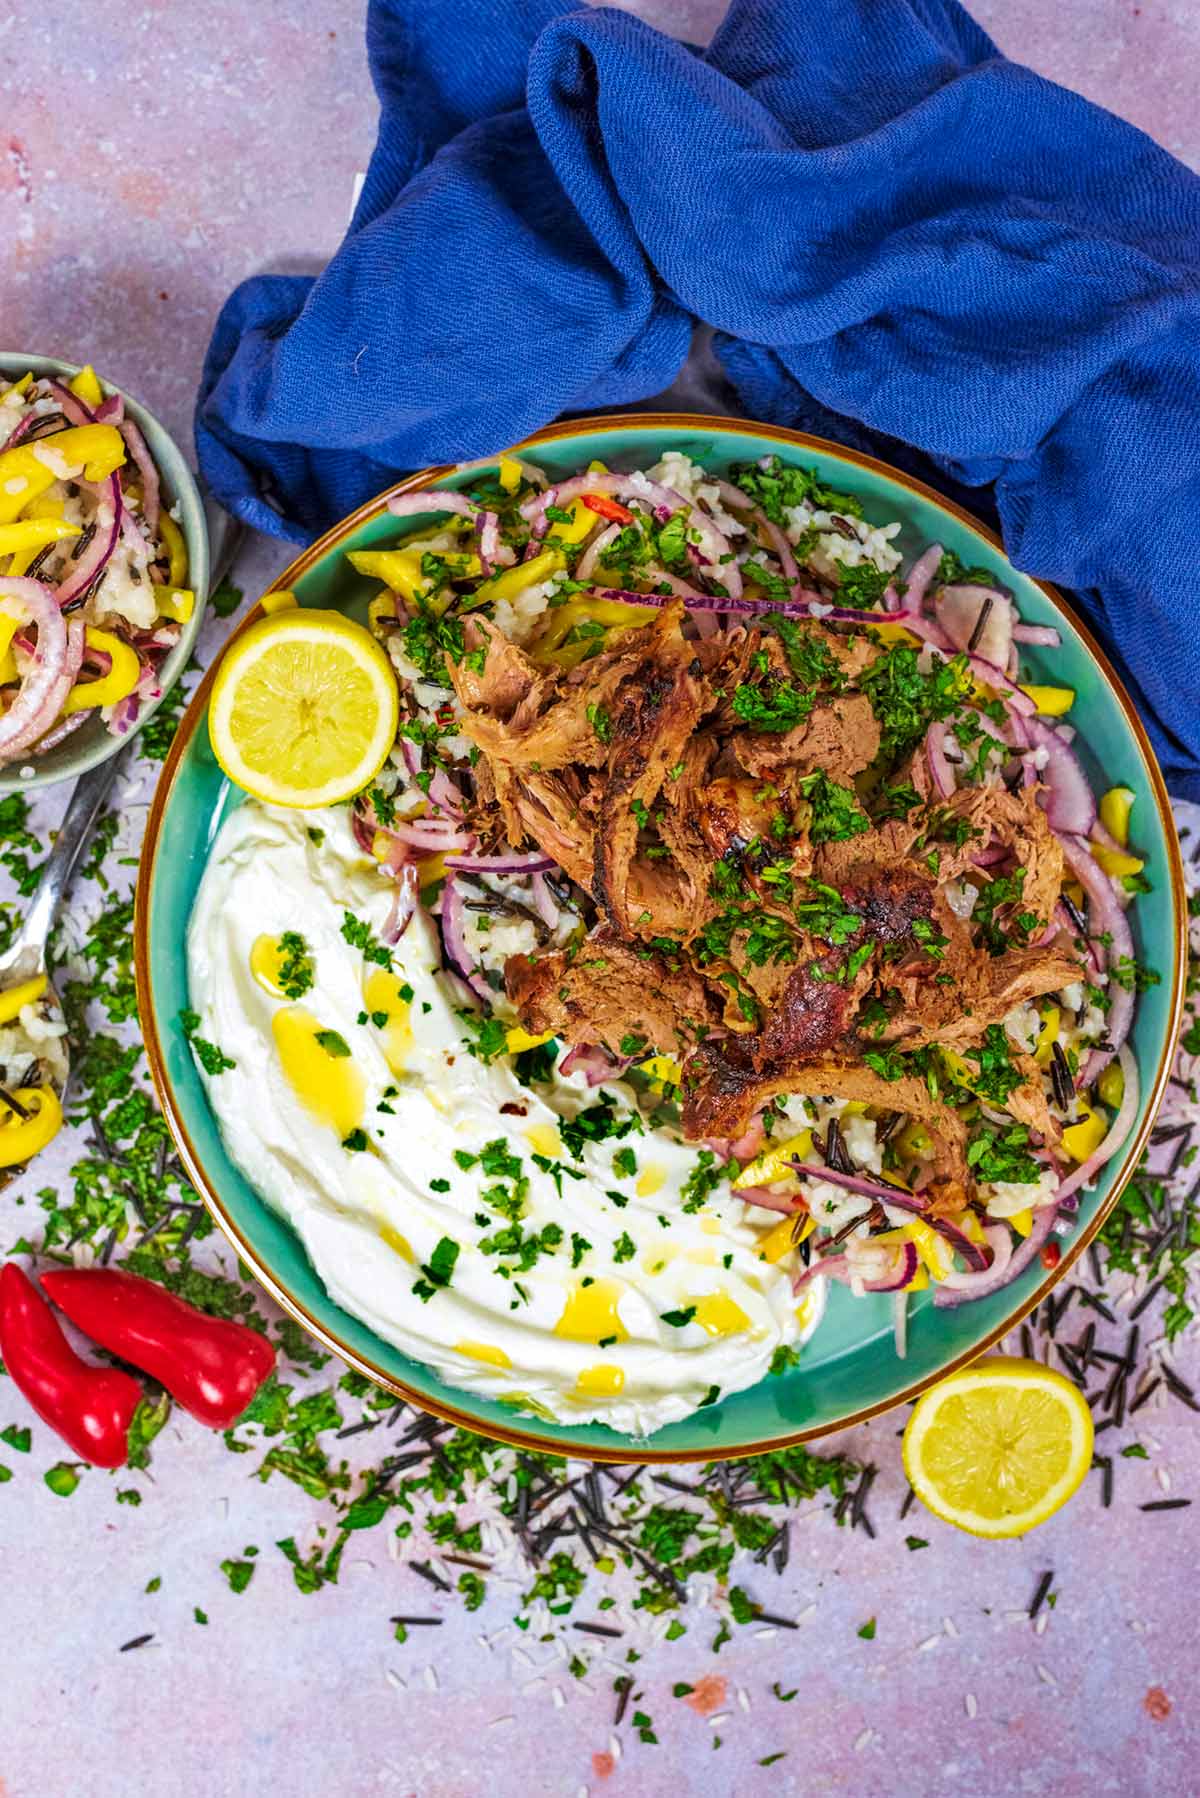 A plate of shredded lamb on a bed of rice with some Greek yogurt.